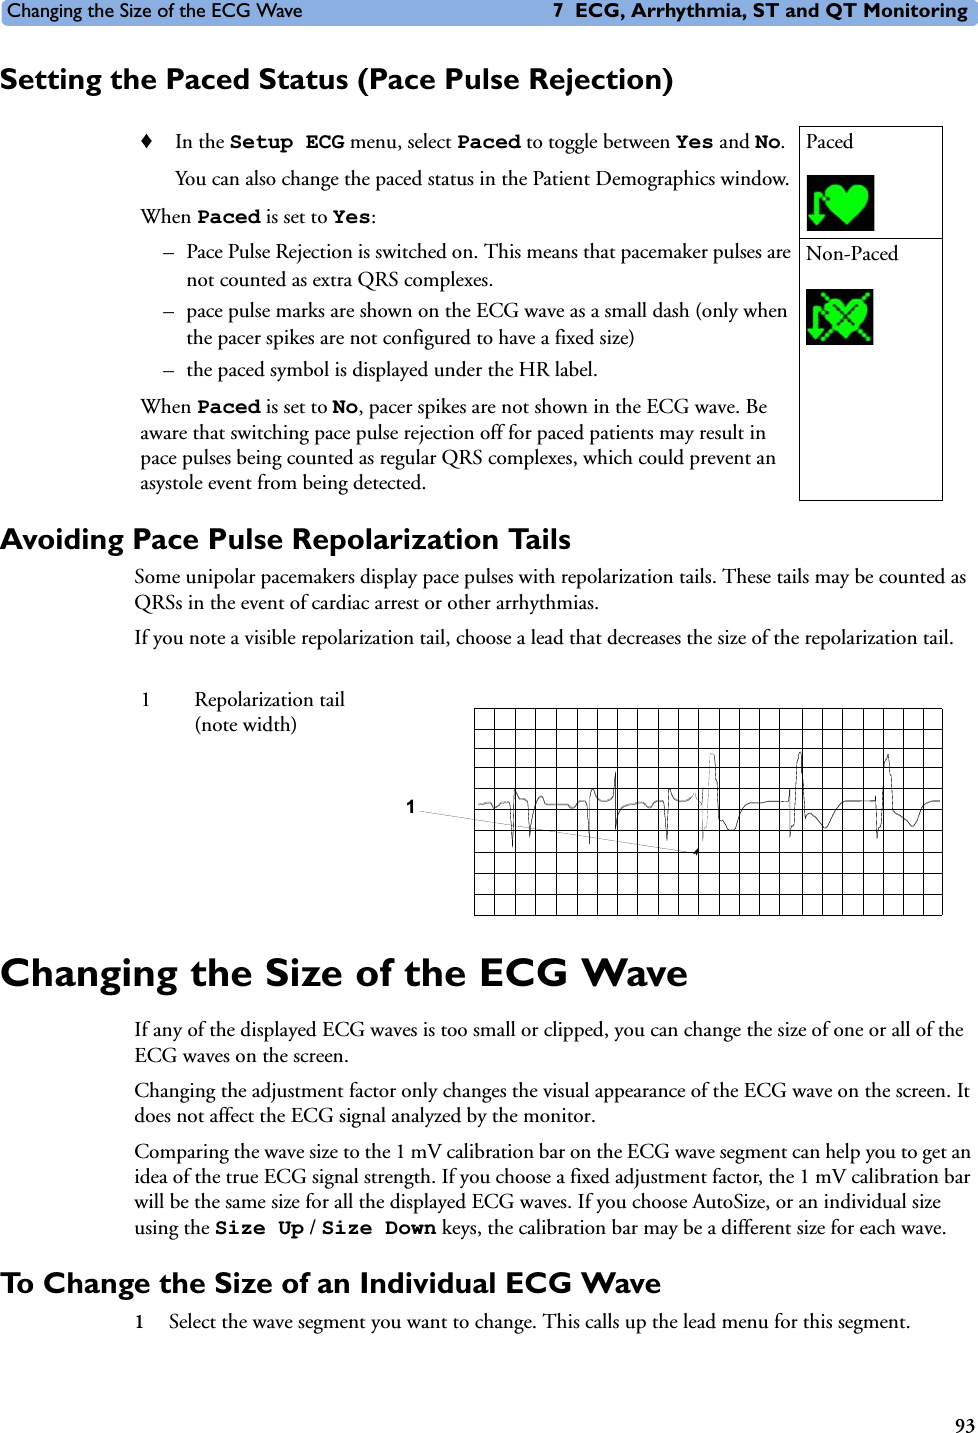 Changing the Size of the ECG Wave 7 ECG, Arrhythmia, ST and QT Monitoring93Setting the Paced Status (Pace Pulse Rejection)Avoiding Pace Pulse Repolarization TailsSome unipolar pacemakers display pace pulses with repolarization tails. These tails may be counted as QRSs in the event of cardiac arrest or other arrhythmias. If you note a visible repolarization tail, choose a lead that decreases the size of the repolarization tail.Changing the Size of the ECG WaveIf any of the displayed ECG waves is too small or clipped, you can change the size of one or all of the ECG waves on the screen.Changing the adjustment factor only changes the visual appearance of the ECG wave on the screen. It does not affect the ECG signal analyzed by the monitor.Comparing the wave size to the 1 mV calibration bar on the ECG wave segment can help you to get an idea of the true ECG signal strength. If you choose a fixed adjustment factor, the 1 mV calibration bar will be the same size for all the displayed ECG waves. If you choose AutoSize, or an individual size using the Size Up / Size Down keys, the calibration bar may be a different size for each wave. To Change the Size of an Individual ECG Wave1Select the wave segment you want to change. This calls up the lead menu for this segment.♦In the Setup ECG menu, select Paced to toggle between Yes and No. You can also change the paced status in the Patient Demographics window. When Paced is set to Yes: – Pace Pulse Rejection is switched on. This means that pacemaker pulses are not counted as extra QRS complexes. – pace pulse marks are shown on the ECG wave as a small dash (only when the pacer spikes are not configured to have a fixed size)– the paced symbol is displayed under the HR label.When Paced is set to No, pacer spikes are not shown in the ECG wave. Be aware that switching pace pulse rejection off for paced patients may result in pace pulses being counted as regular QRS complexes, which could prevent an asystole event from being detected.PacedNon-Paced1 Repolarization tail (note width)1